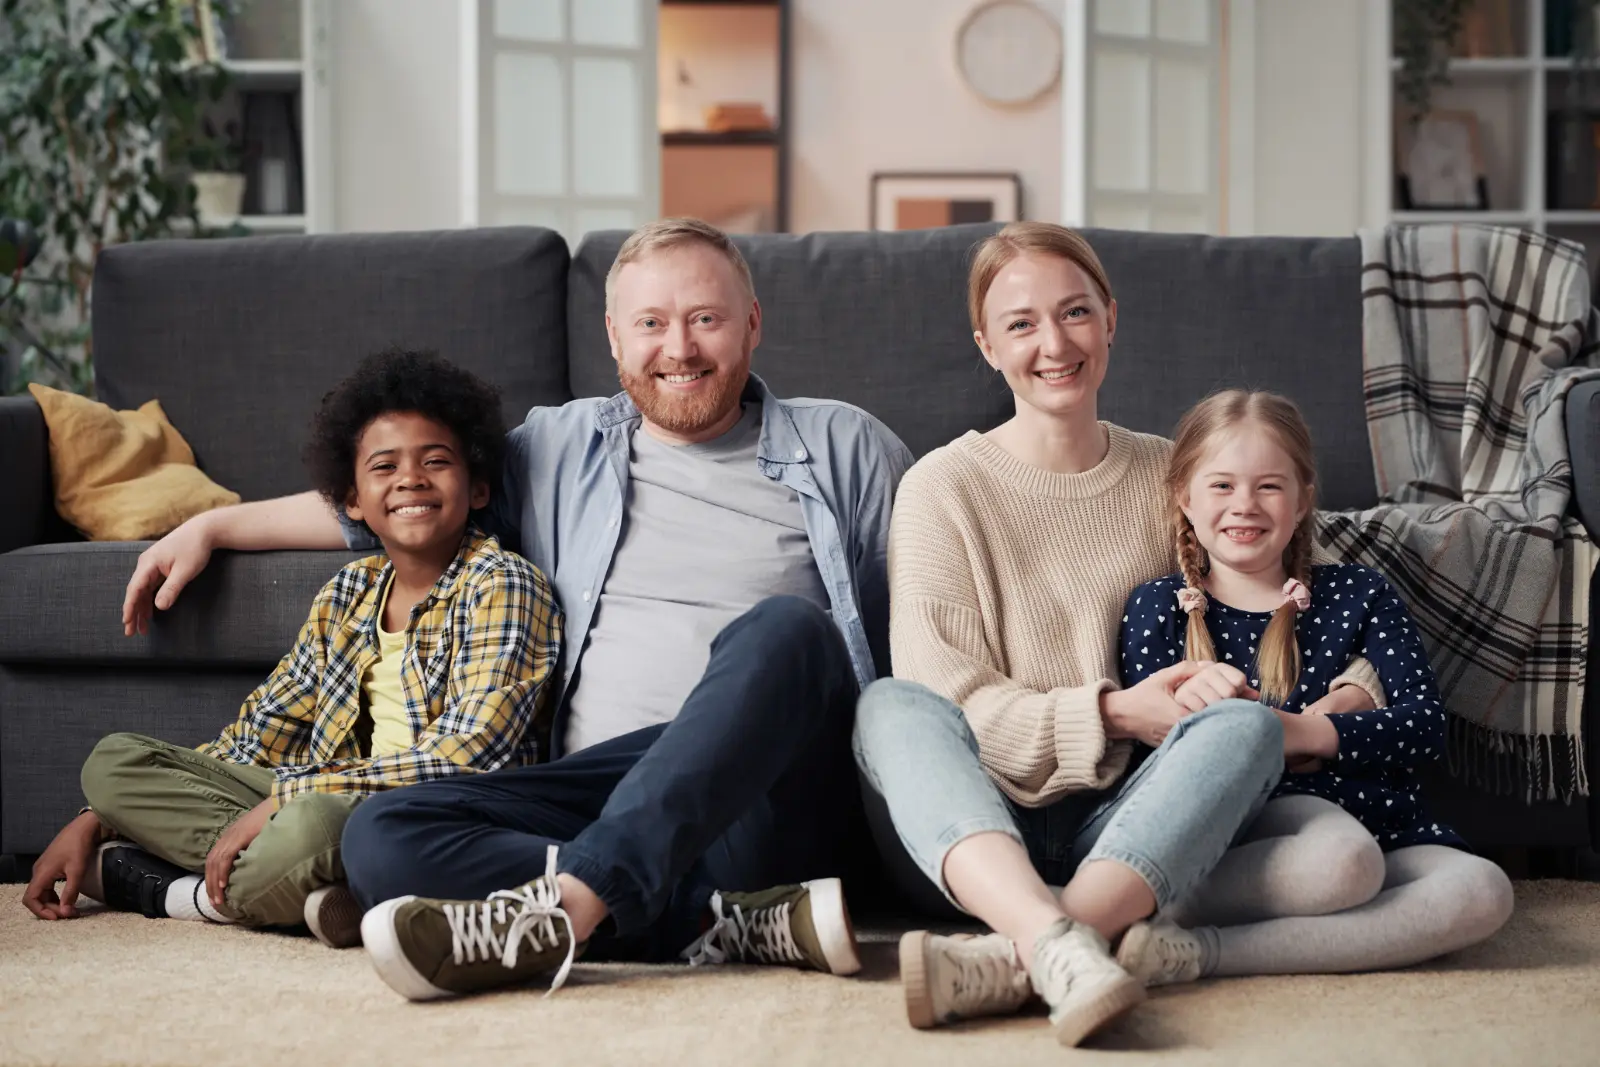 happy-family-with-adopted-children-sitting-on-floor-in-living-room-and-smiling-at-camera